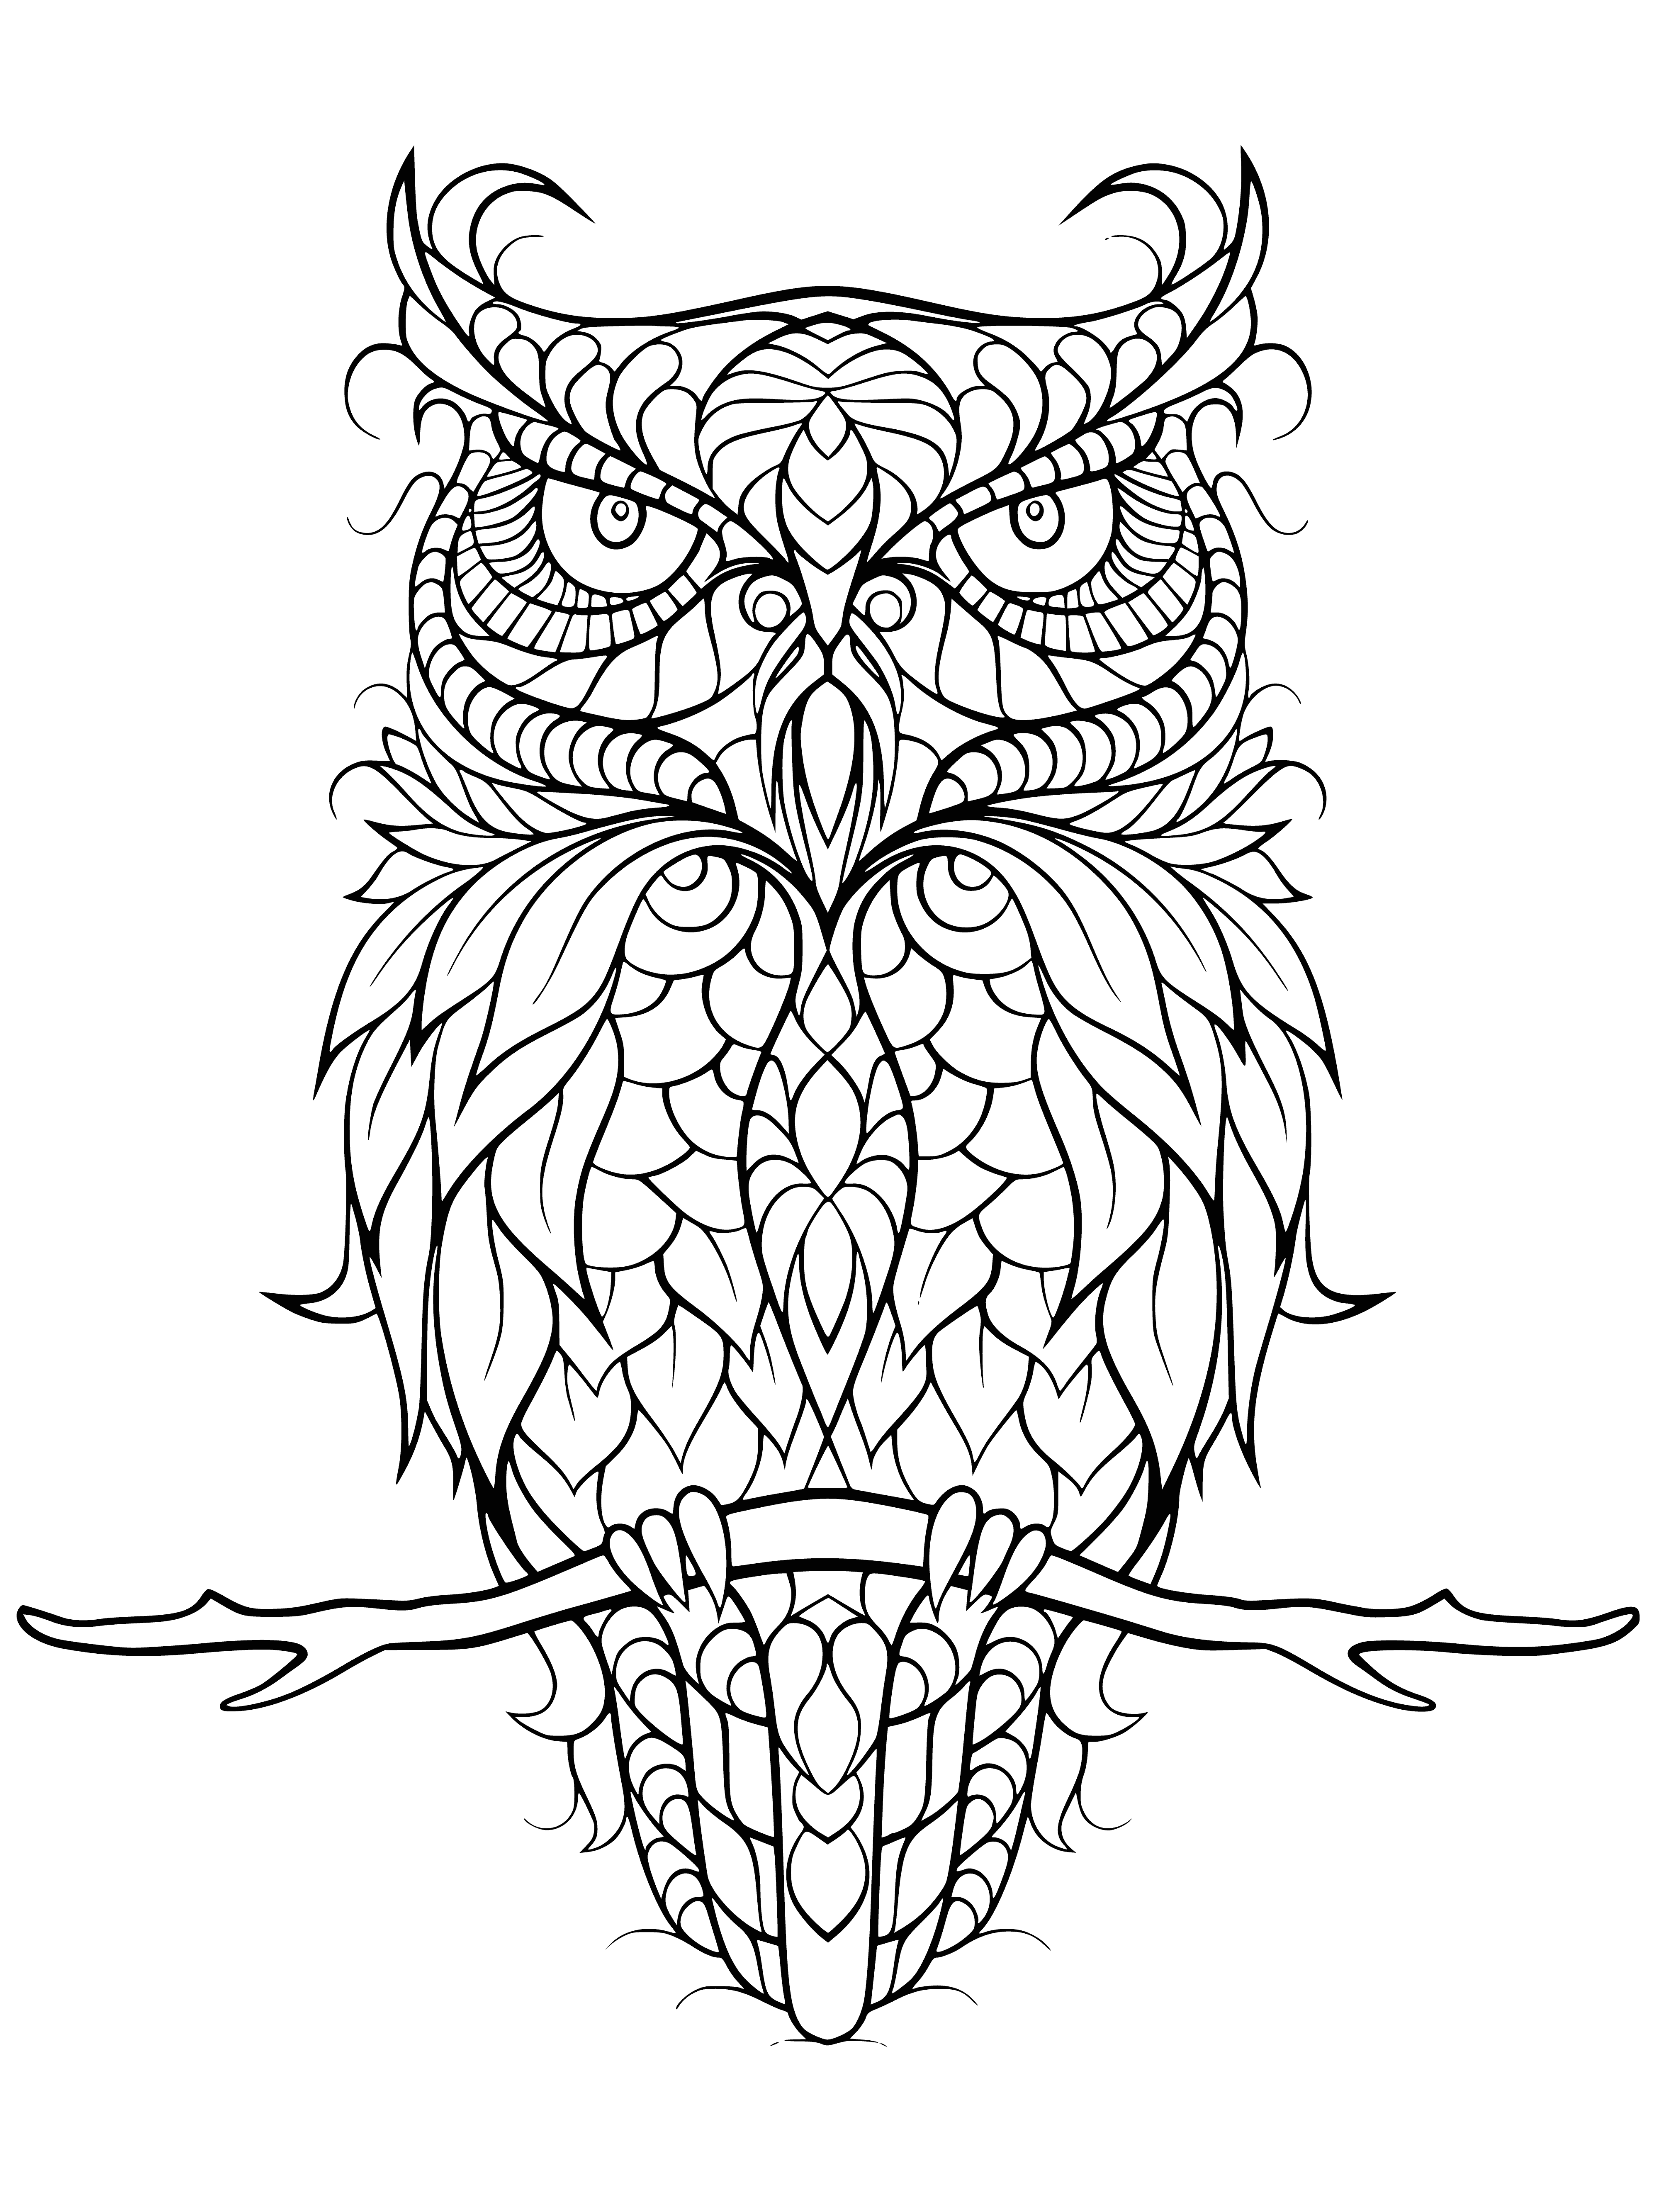 Eared owl coloring page